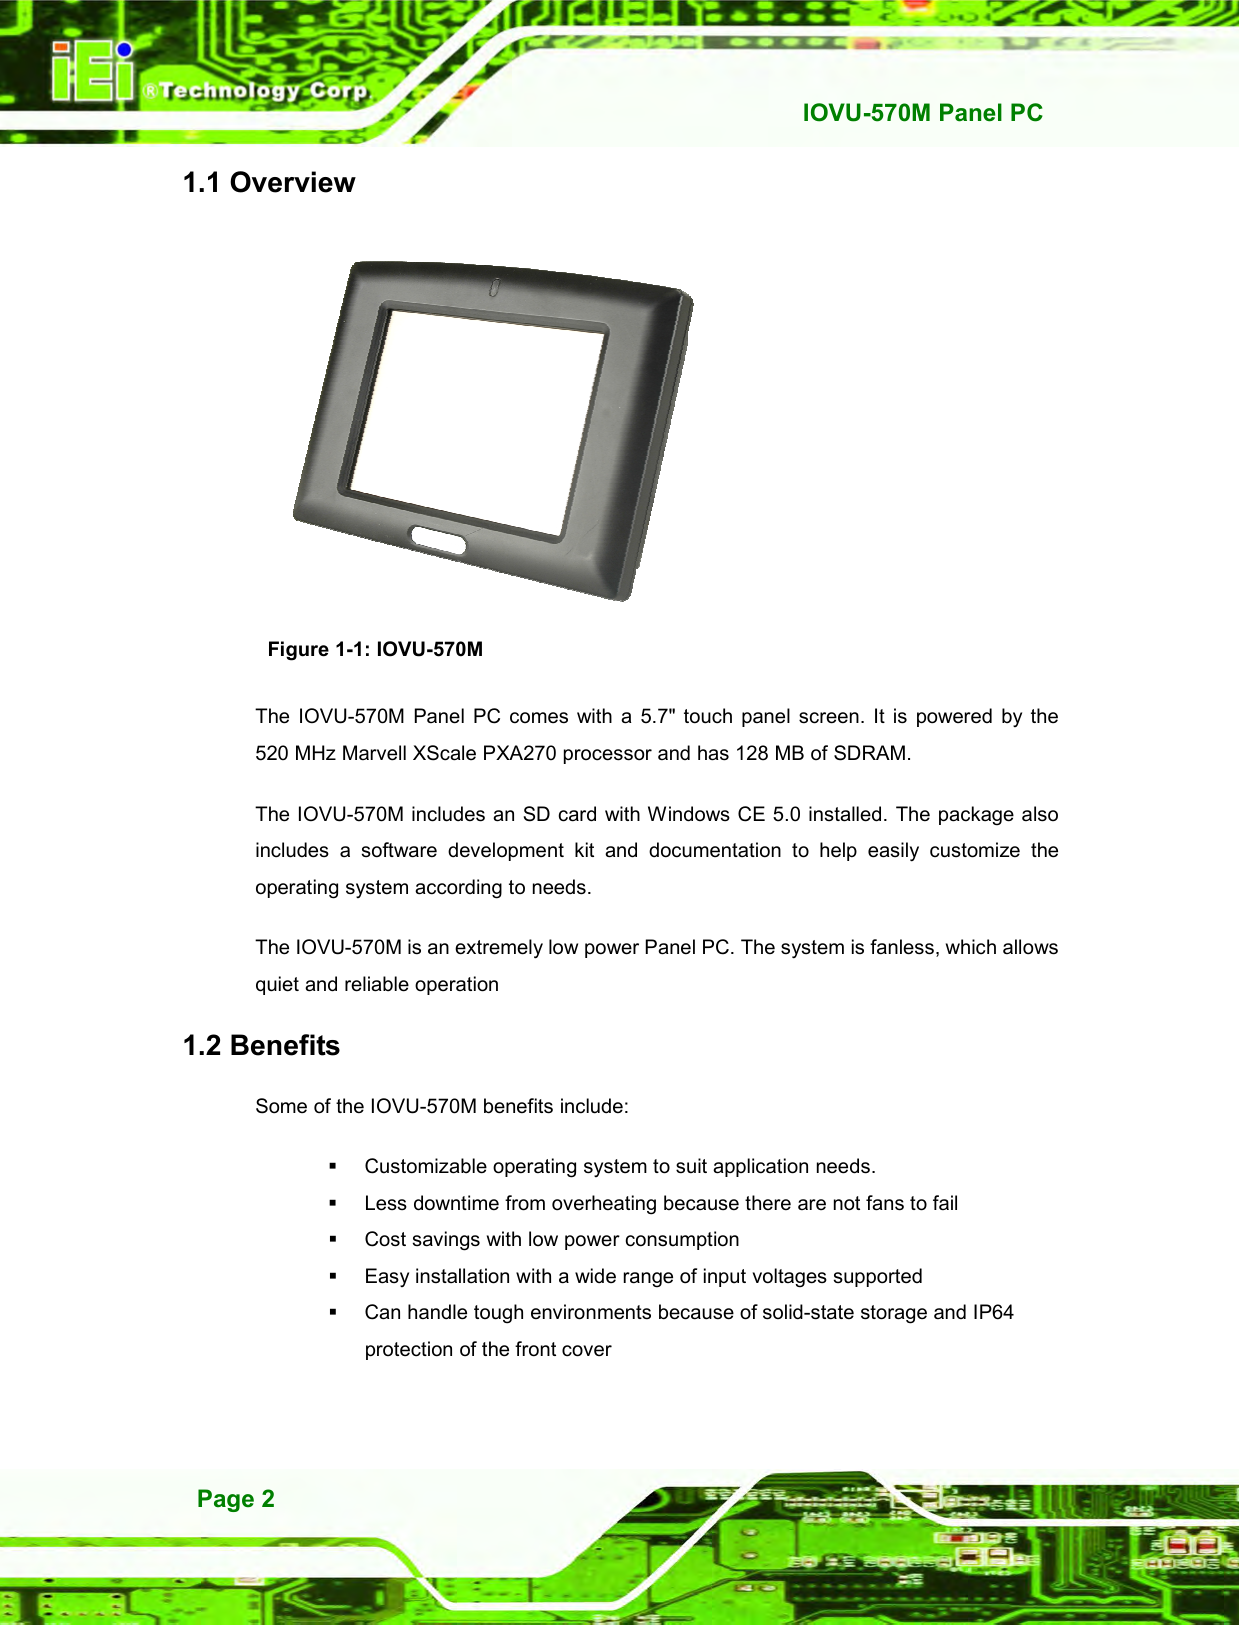   IOVU-570M Panel PC Page 2 1.1 Overview  Figure 1-1: IOVU-570M The  IOVU-570M  Panel  PC comes  with  a  5.7&quot; touch  panel  screen.  It  is  powered  by  the 520 MHz Marvell XScale PXA270 processor and has 128 MB of SDRAM. The IOVU-570M includes an SD card with Windows CE 5.0 installed. The package also includes  a  software  development  kit  and  documentation  to  help  easily  customize  the operating system according to needs. The IOVU-570M is an extremely low power Panel PC. The system is fanless, which allows quiet and reliable operation 1.2 Benefits Some of the IOVU-570M benefits include:   Customizable operating system to suit application needs.   Less downtime from overheating because there are not fans to fail   Cost savings with low power consumption   Easy installation with a wide range of input voltages supported   Can handle tough environments because of solid-state storage and IP64 protection of the front cover 